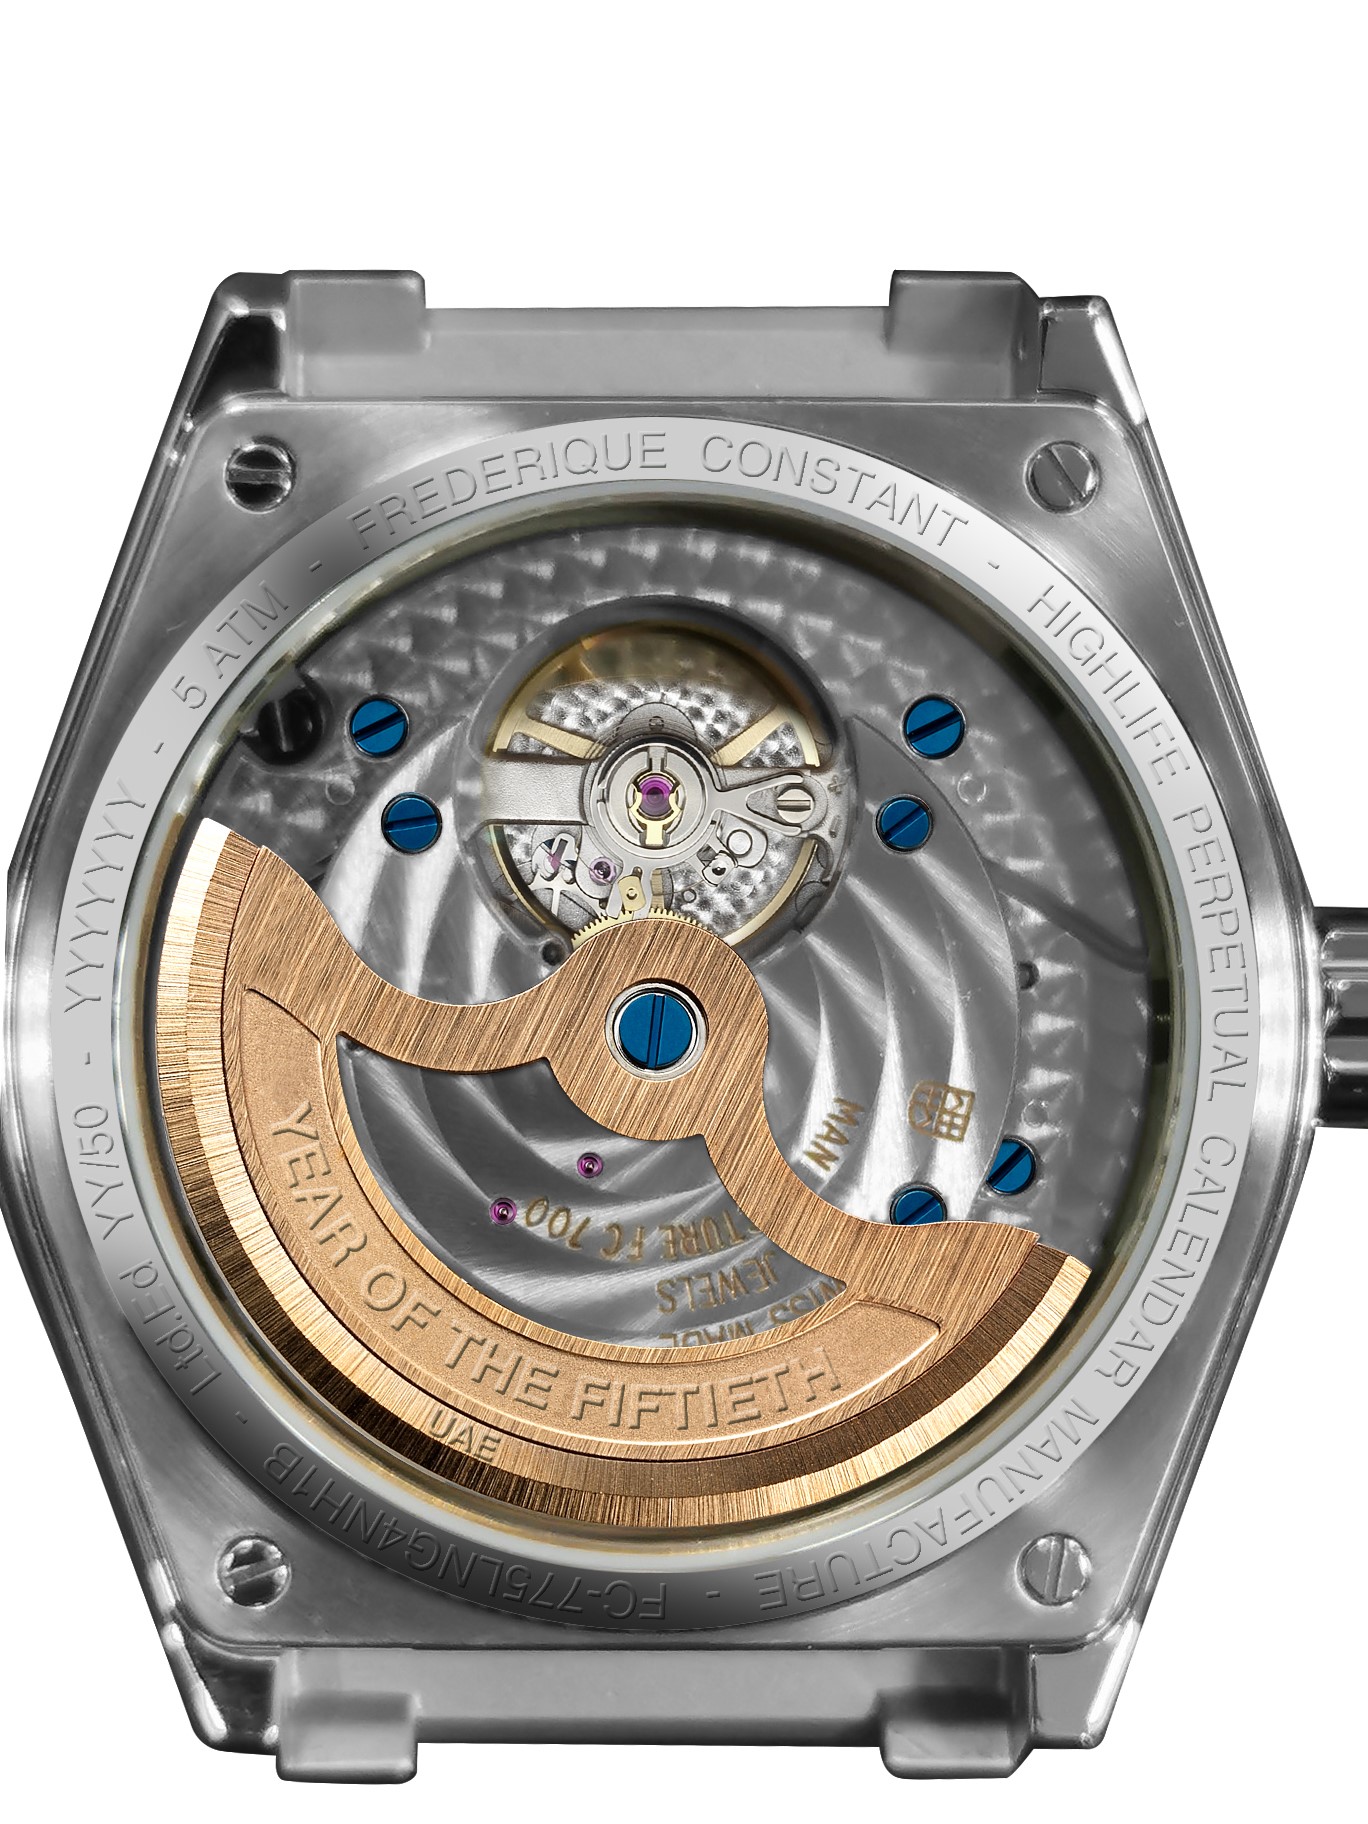 highlife-perpetual-calendar-manufacture-year-of-the-fiftieth